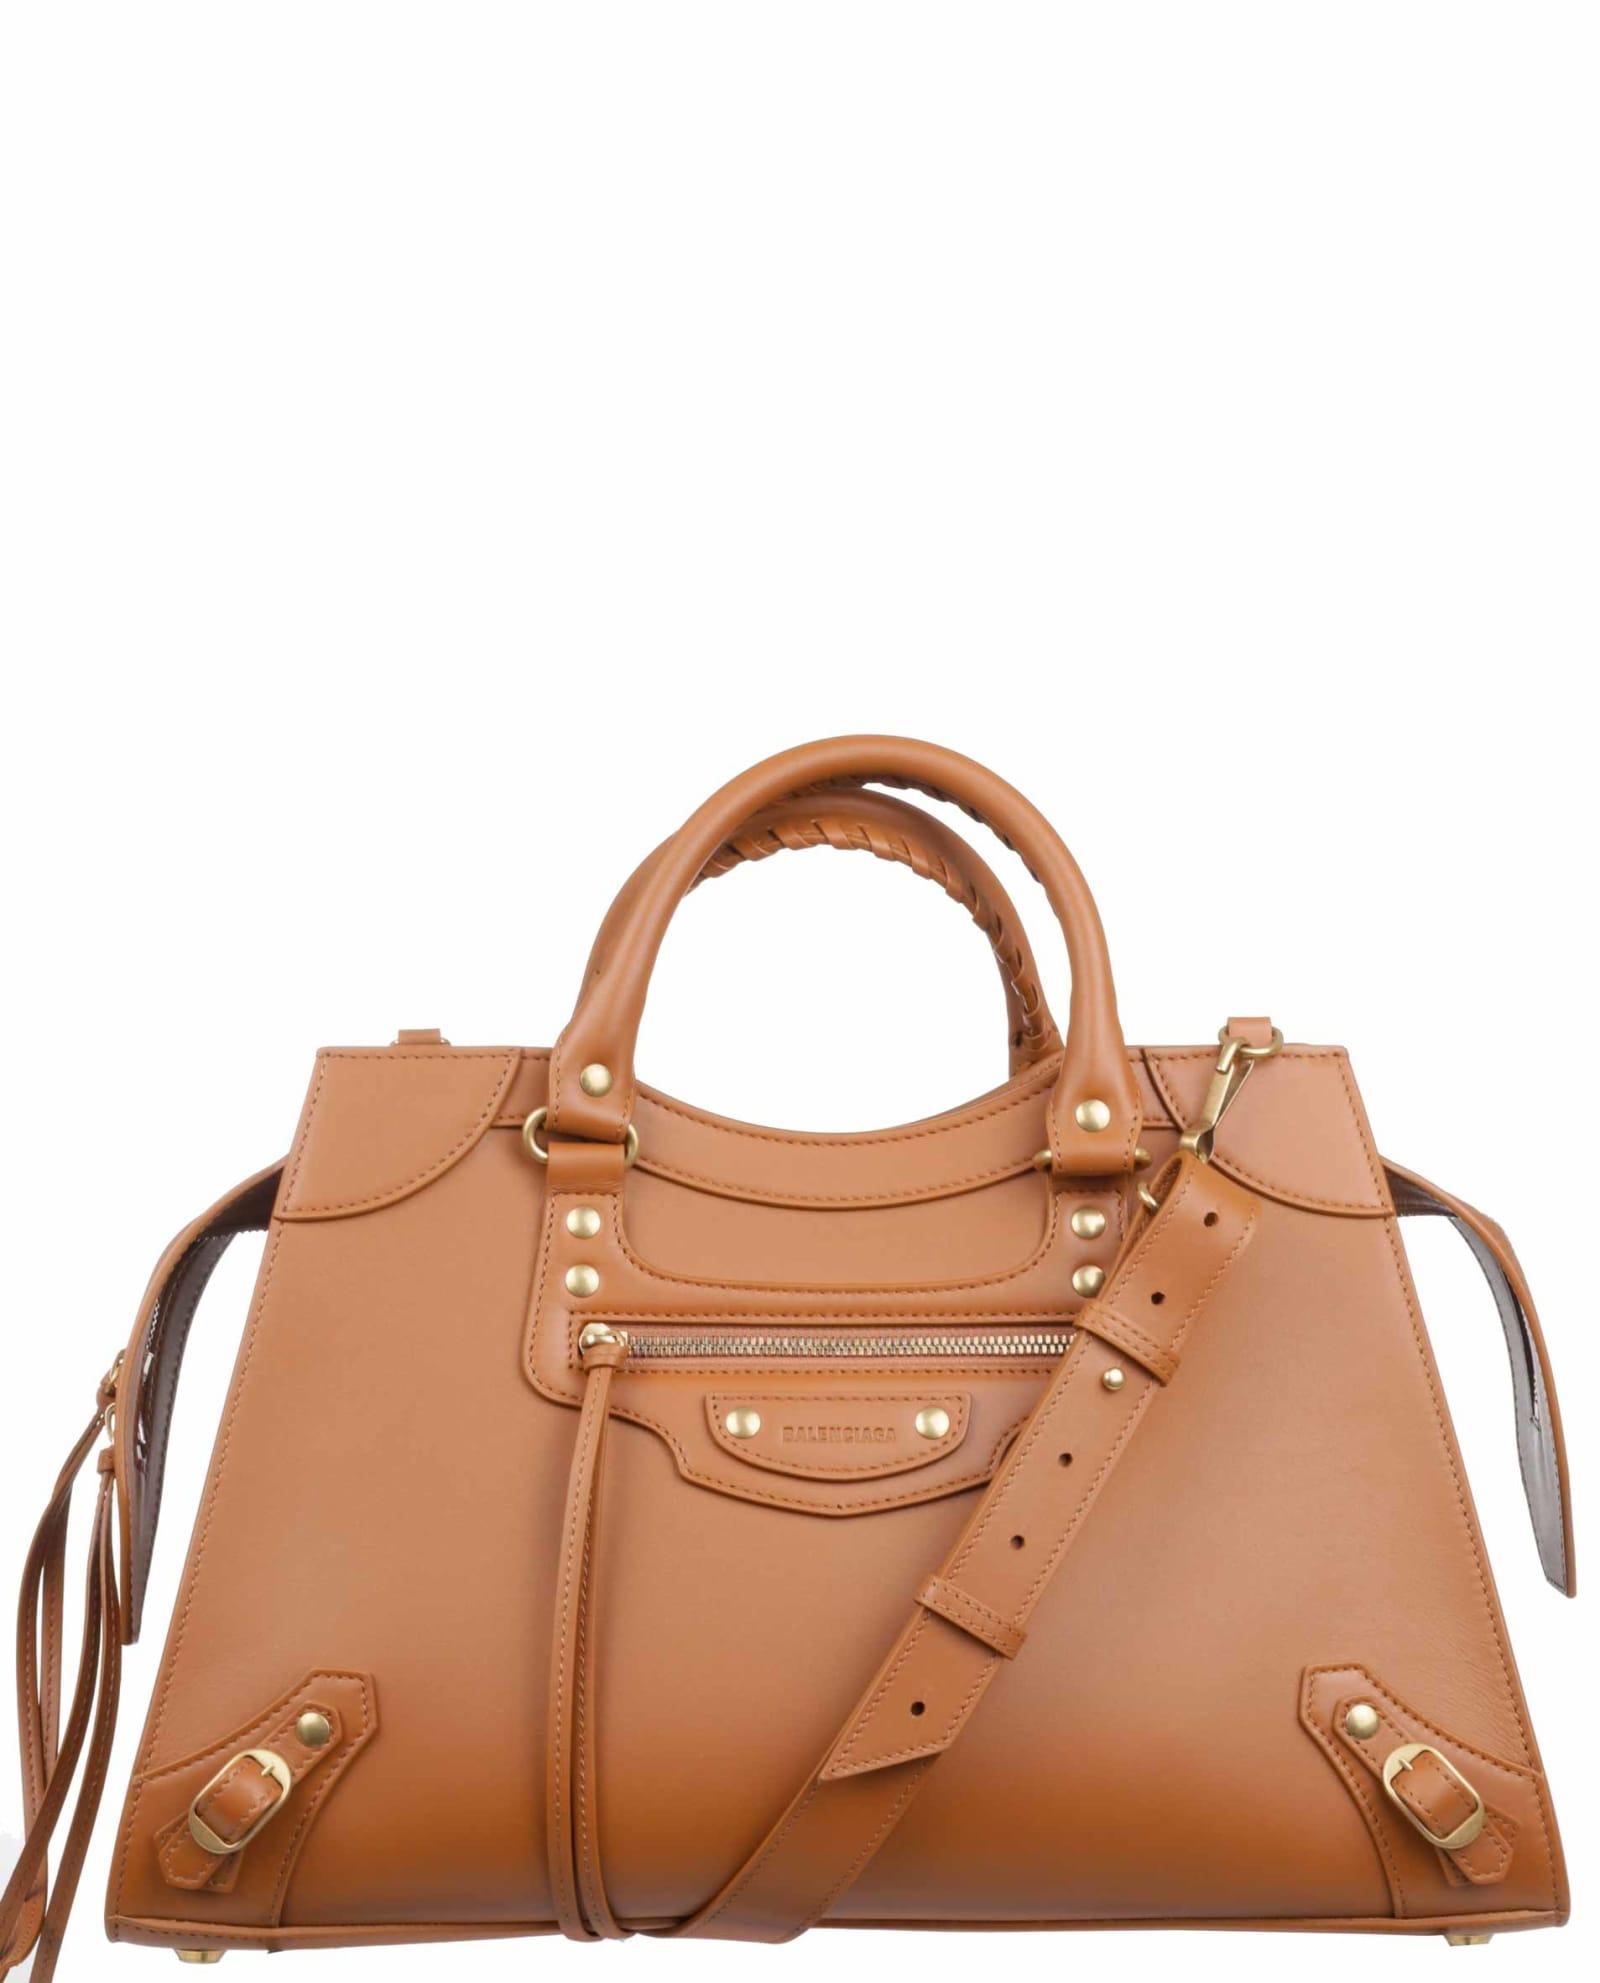 Balenciaga Leather Neo Classic City Bag in Beige (Brown) | Lyst